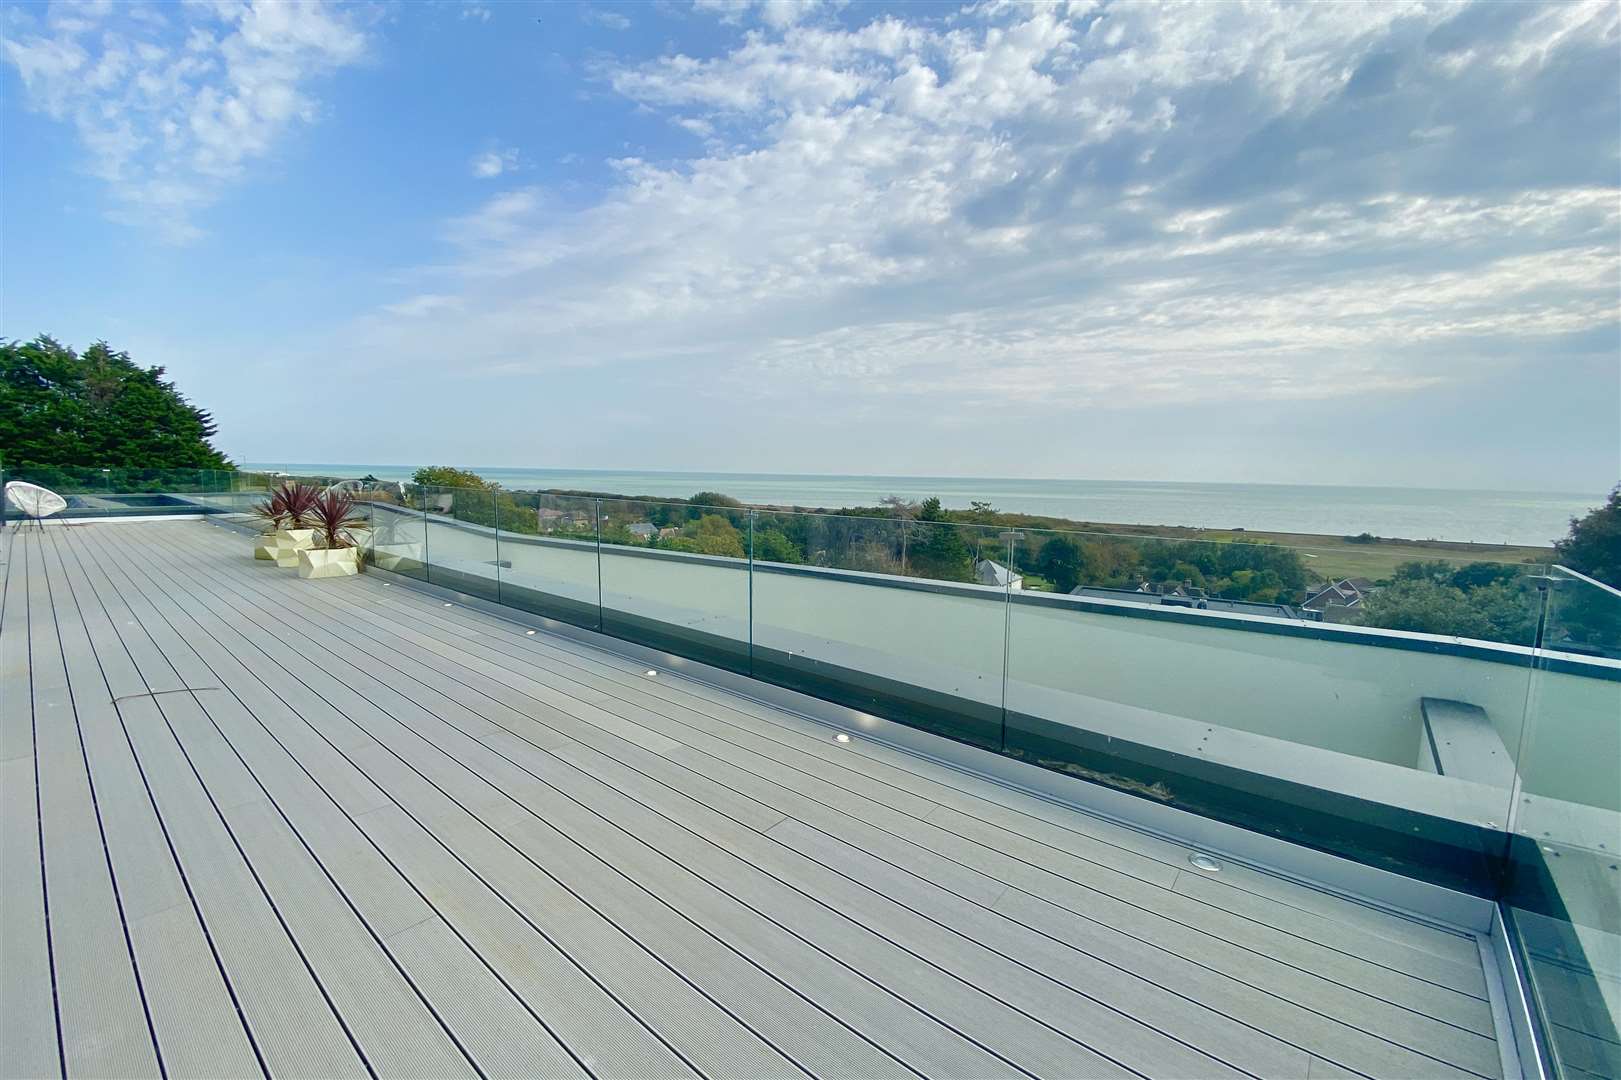 The penthouse has a sea view Picture: CR Child estate agents